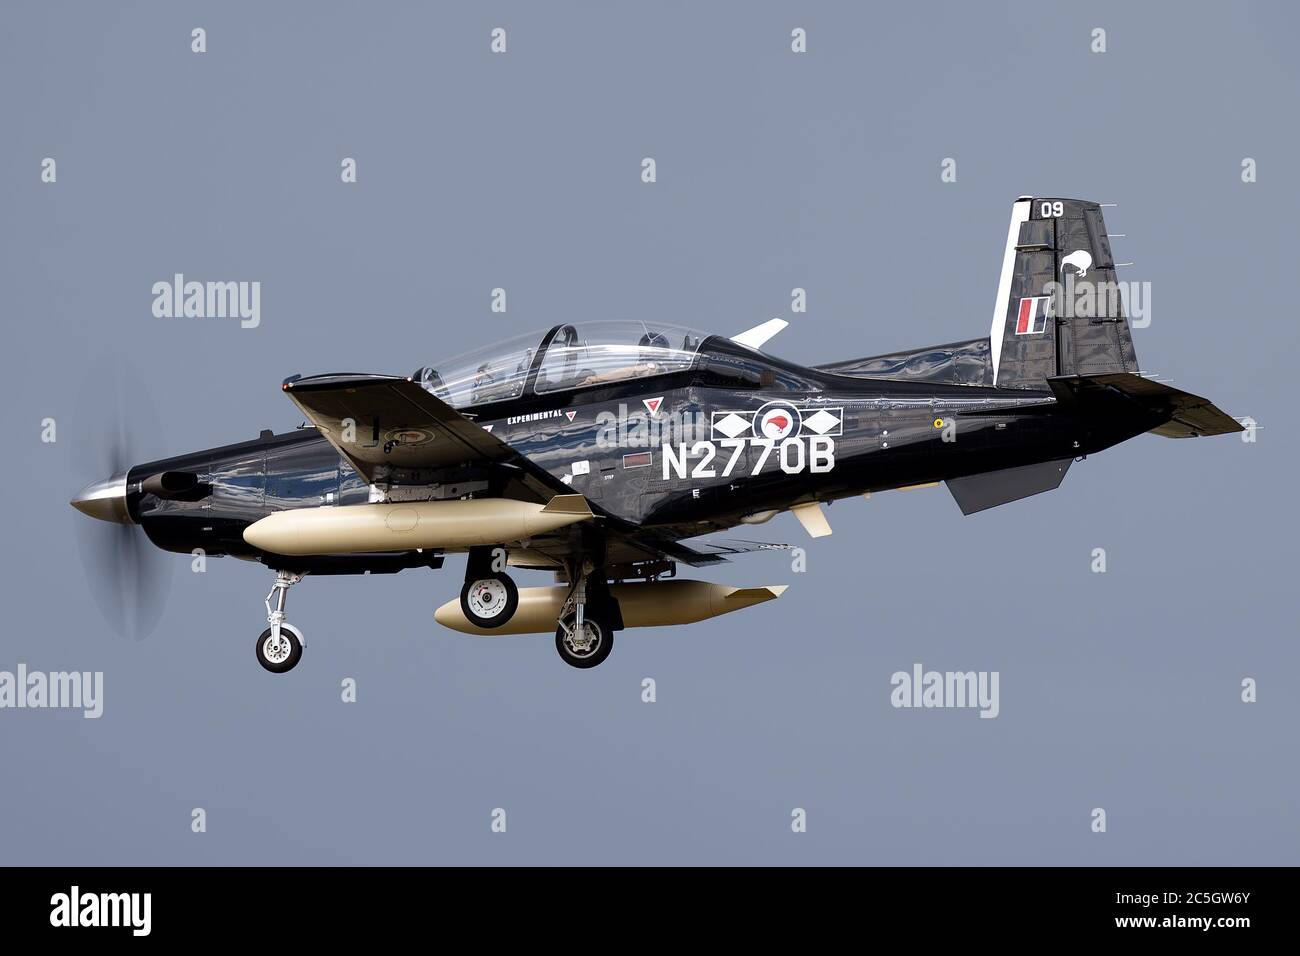 Beechcraft T-6C Texan II single engine military training aircraft on approach to land at Avalon Airport on its journey to be delivered to the Royal Ne Stock Photo